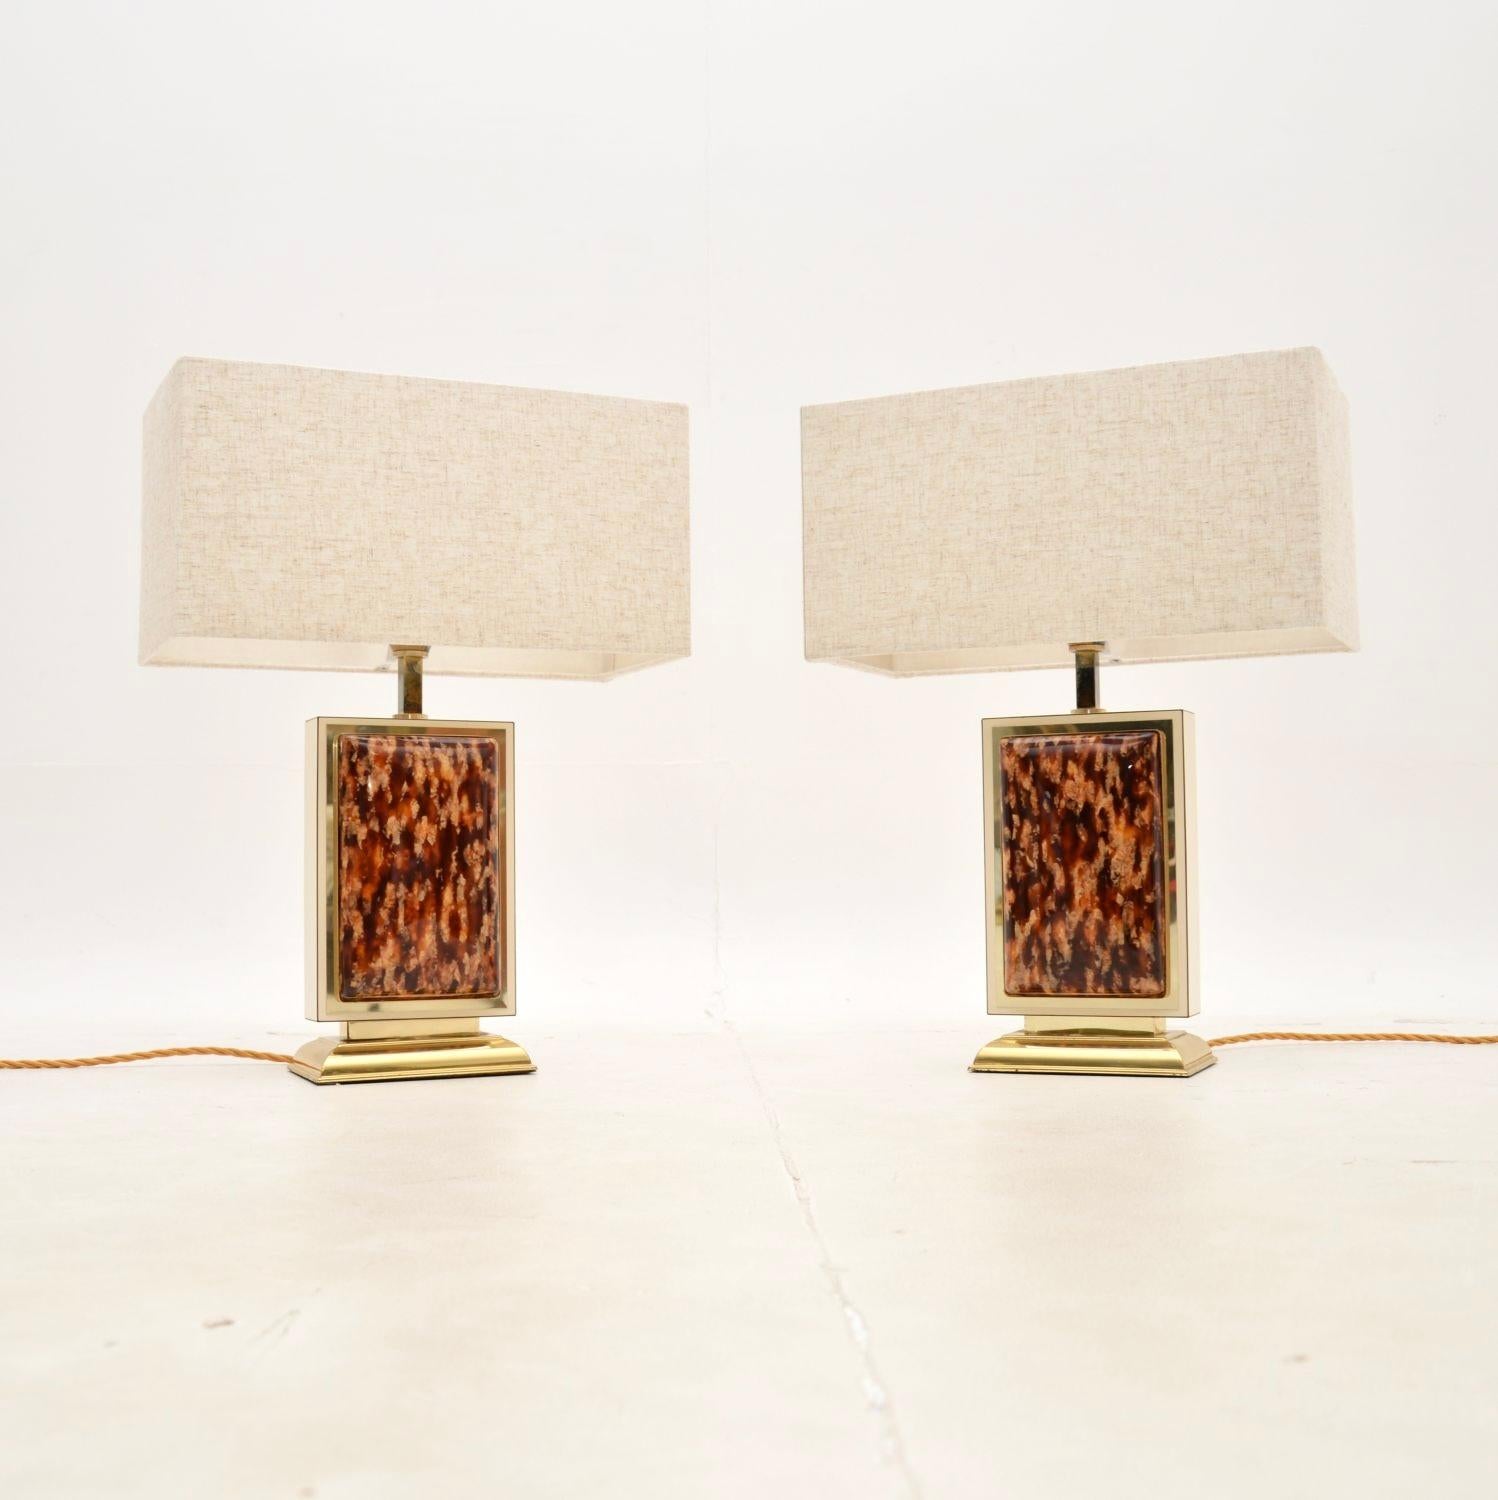 A very stylish and well made pair of vintage French table lamps. They were recently imported from France, they date from the 1970’s.

They are of great quality with a fantastic design, the front and backs have a slightly padded tortoise shell effect